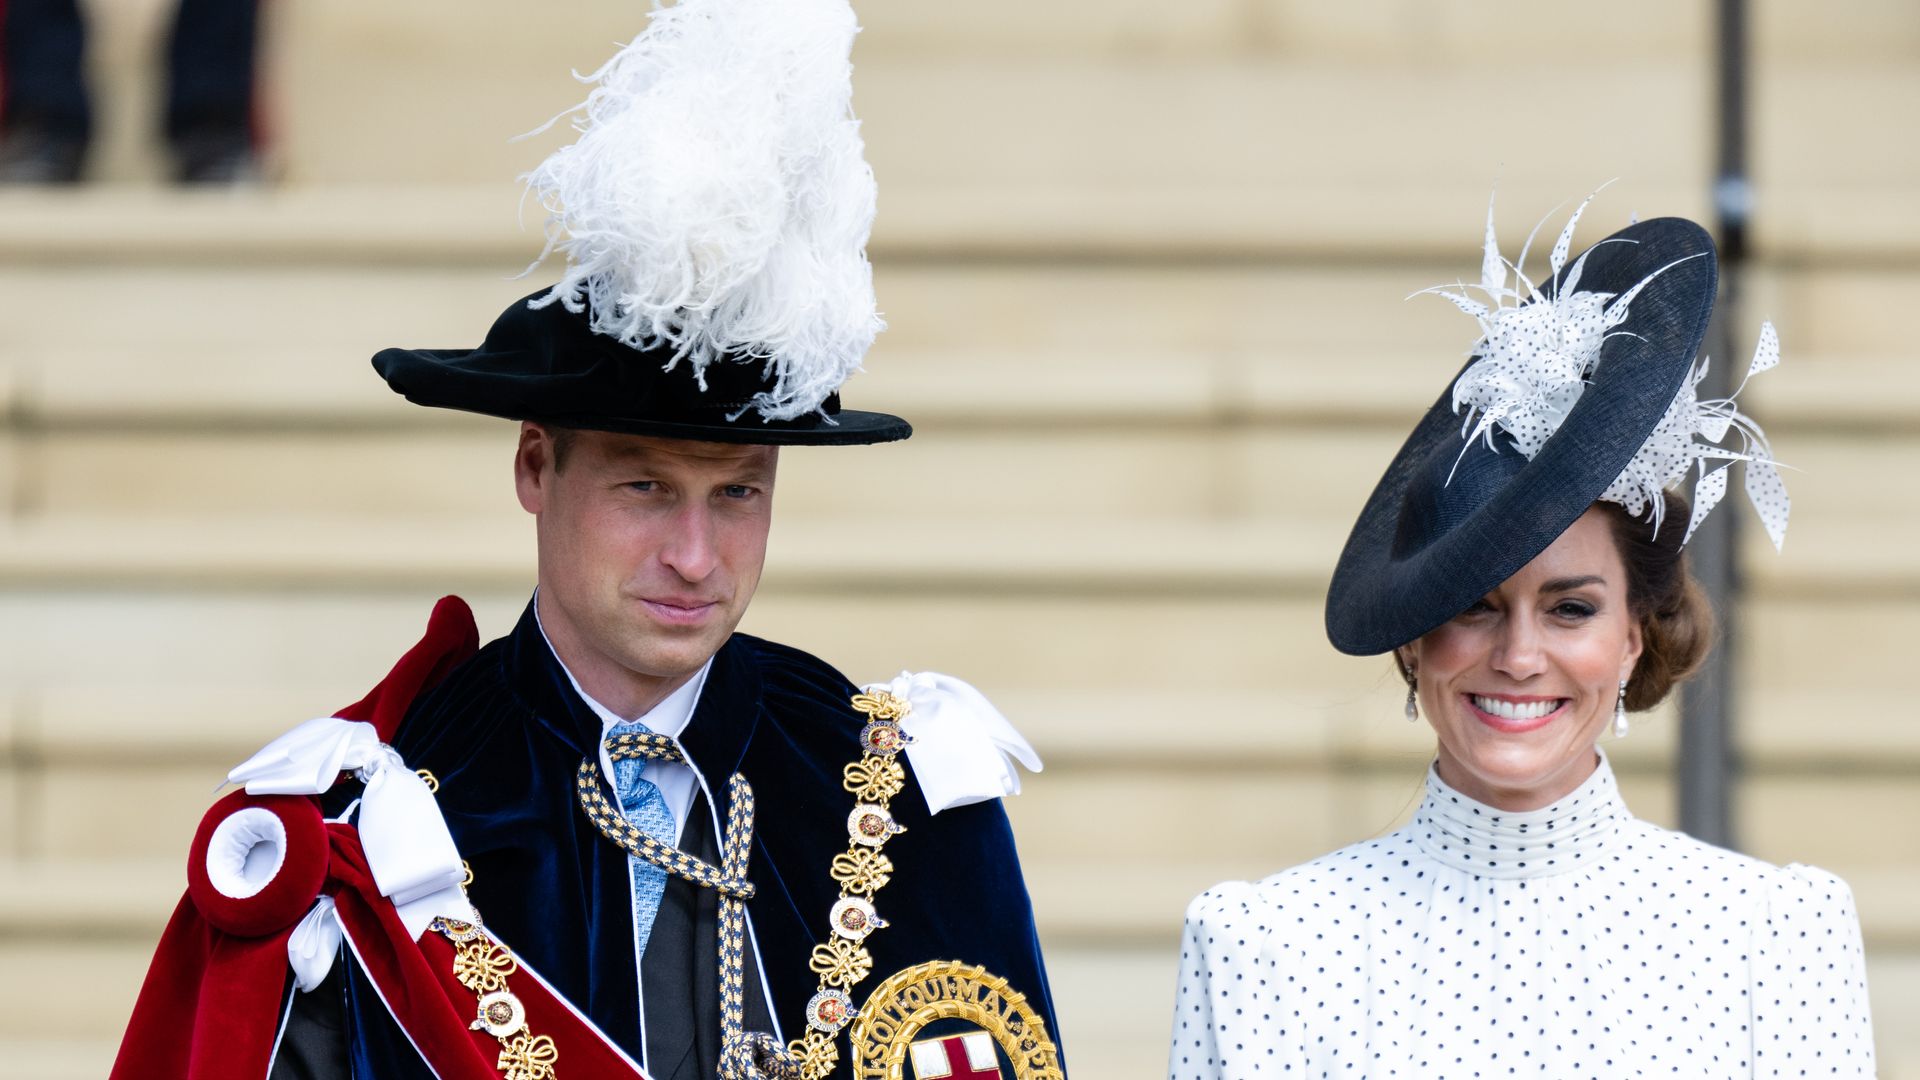 William and Kate attended the Order of the Garter service